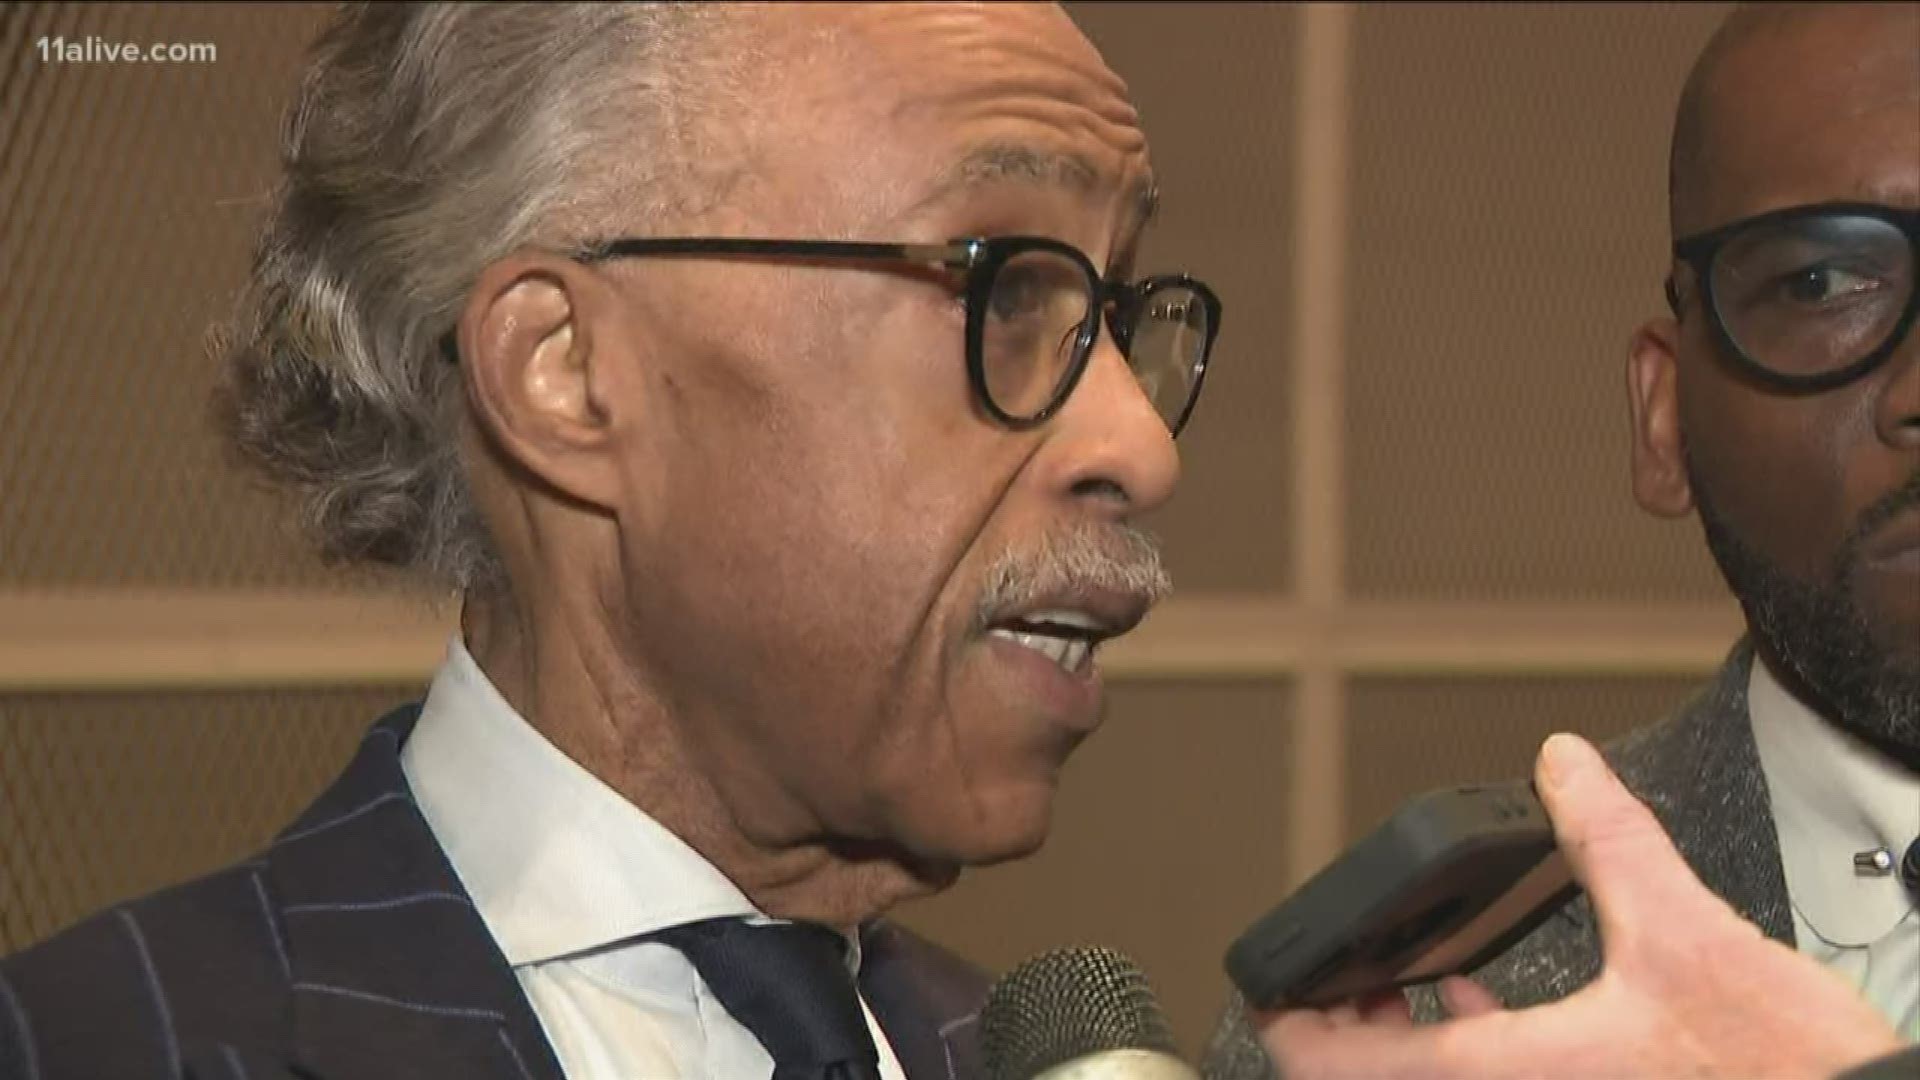 Sharpton to commemorate Dr. Martin Luther King during Sunday's service at local megachurch.